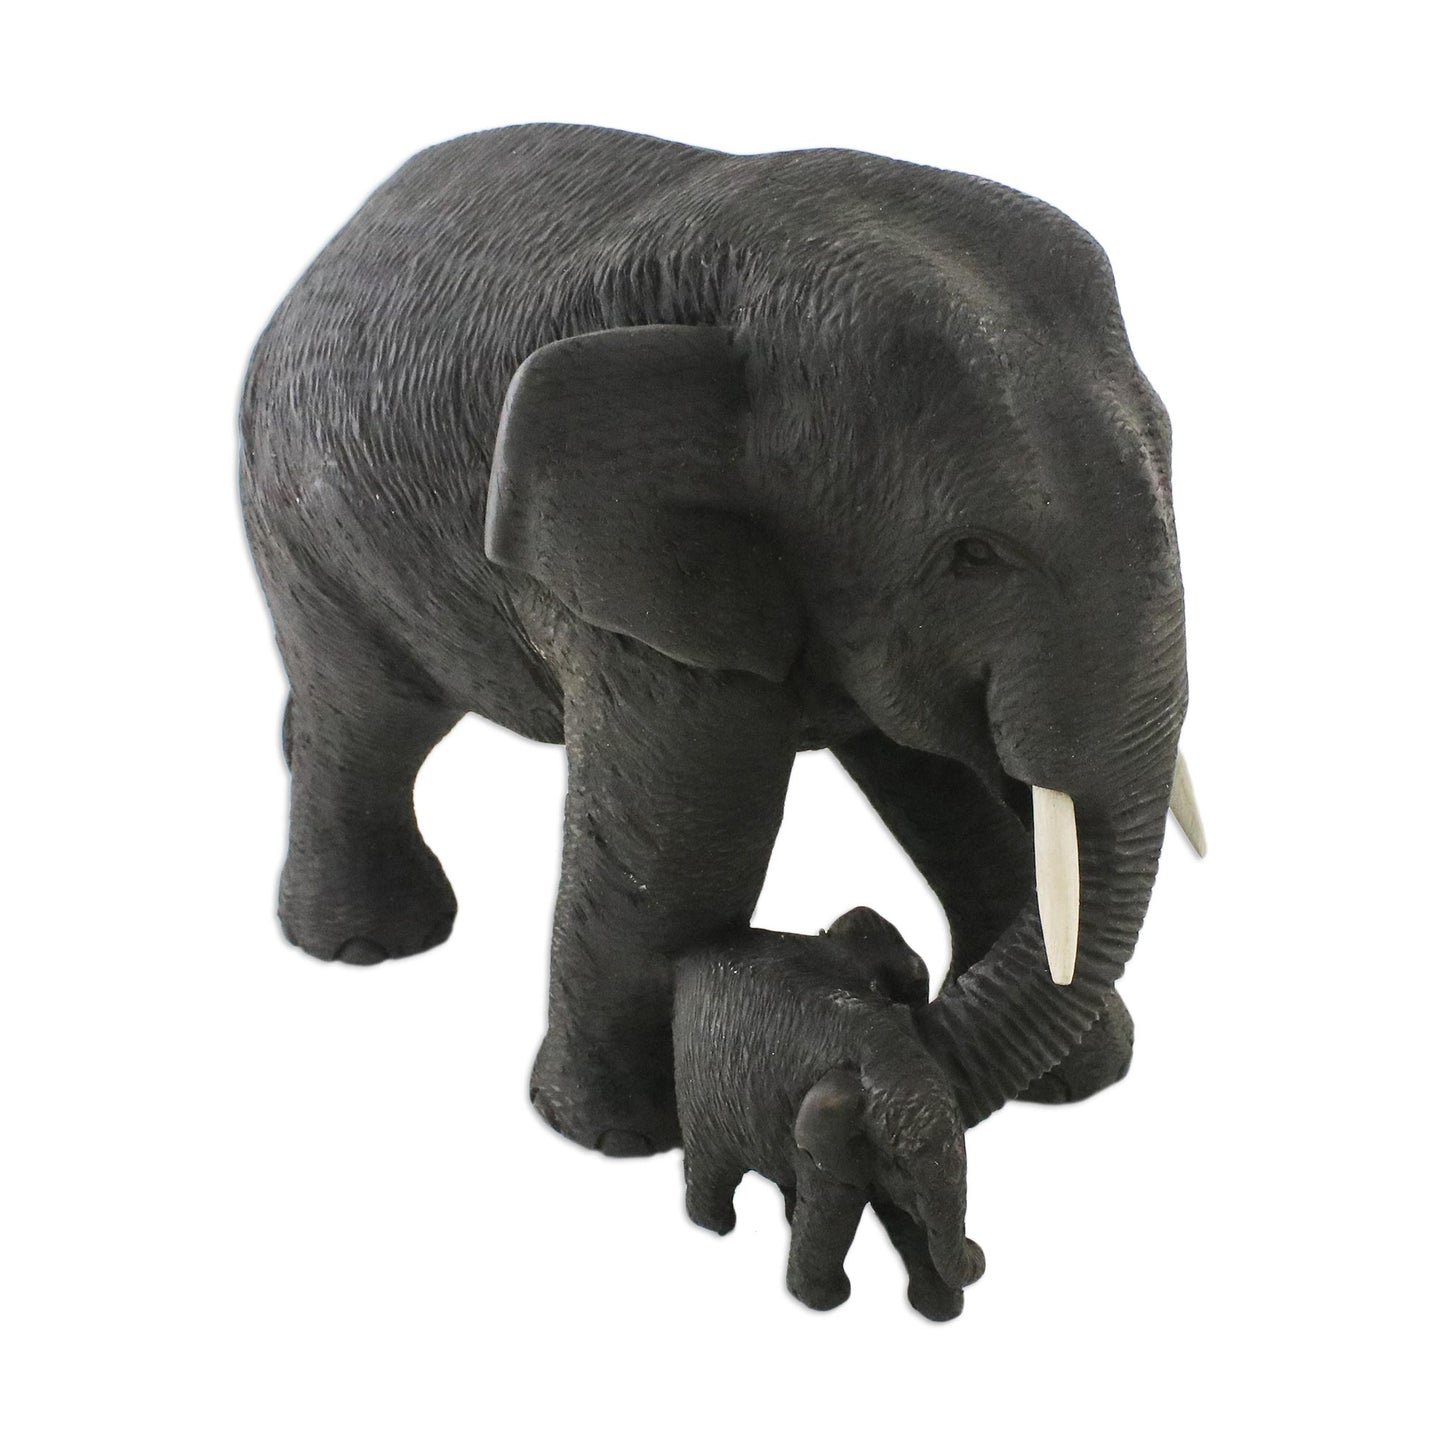 Elephant Mother Elephant Mother and Child Hand Carved Teak Figurine